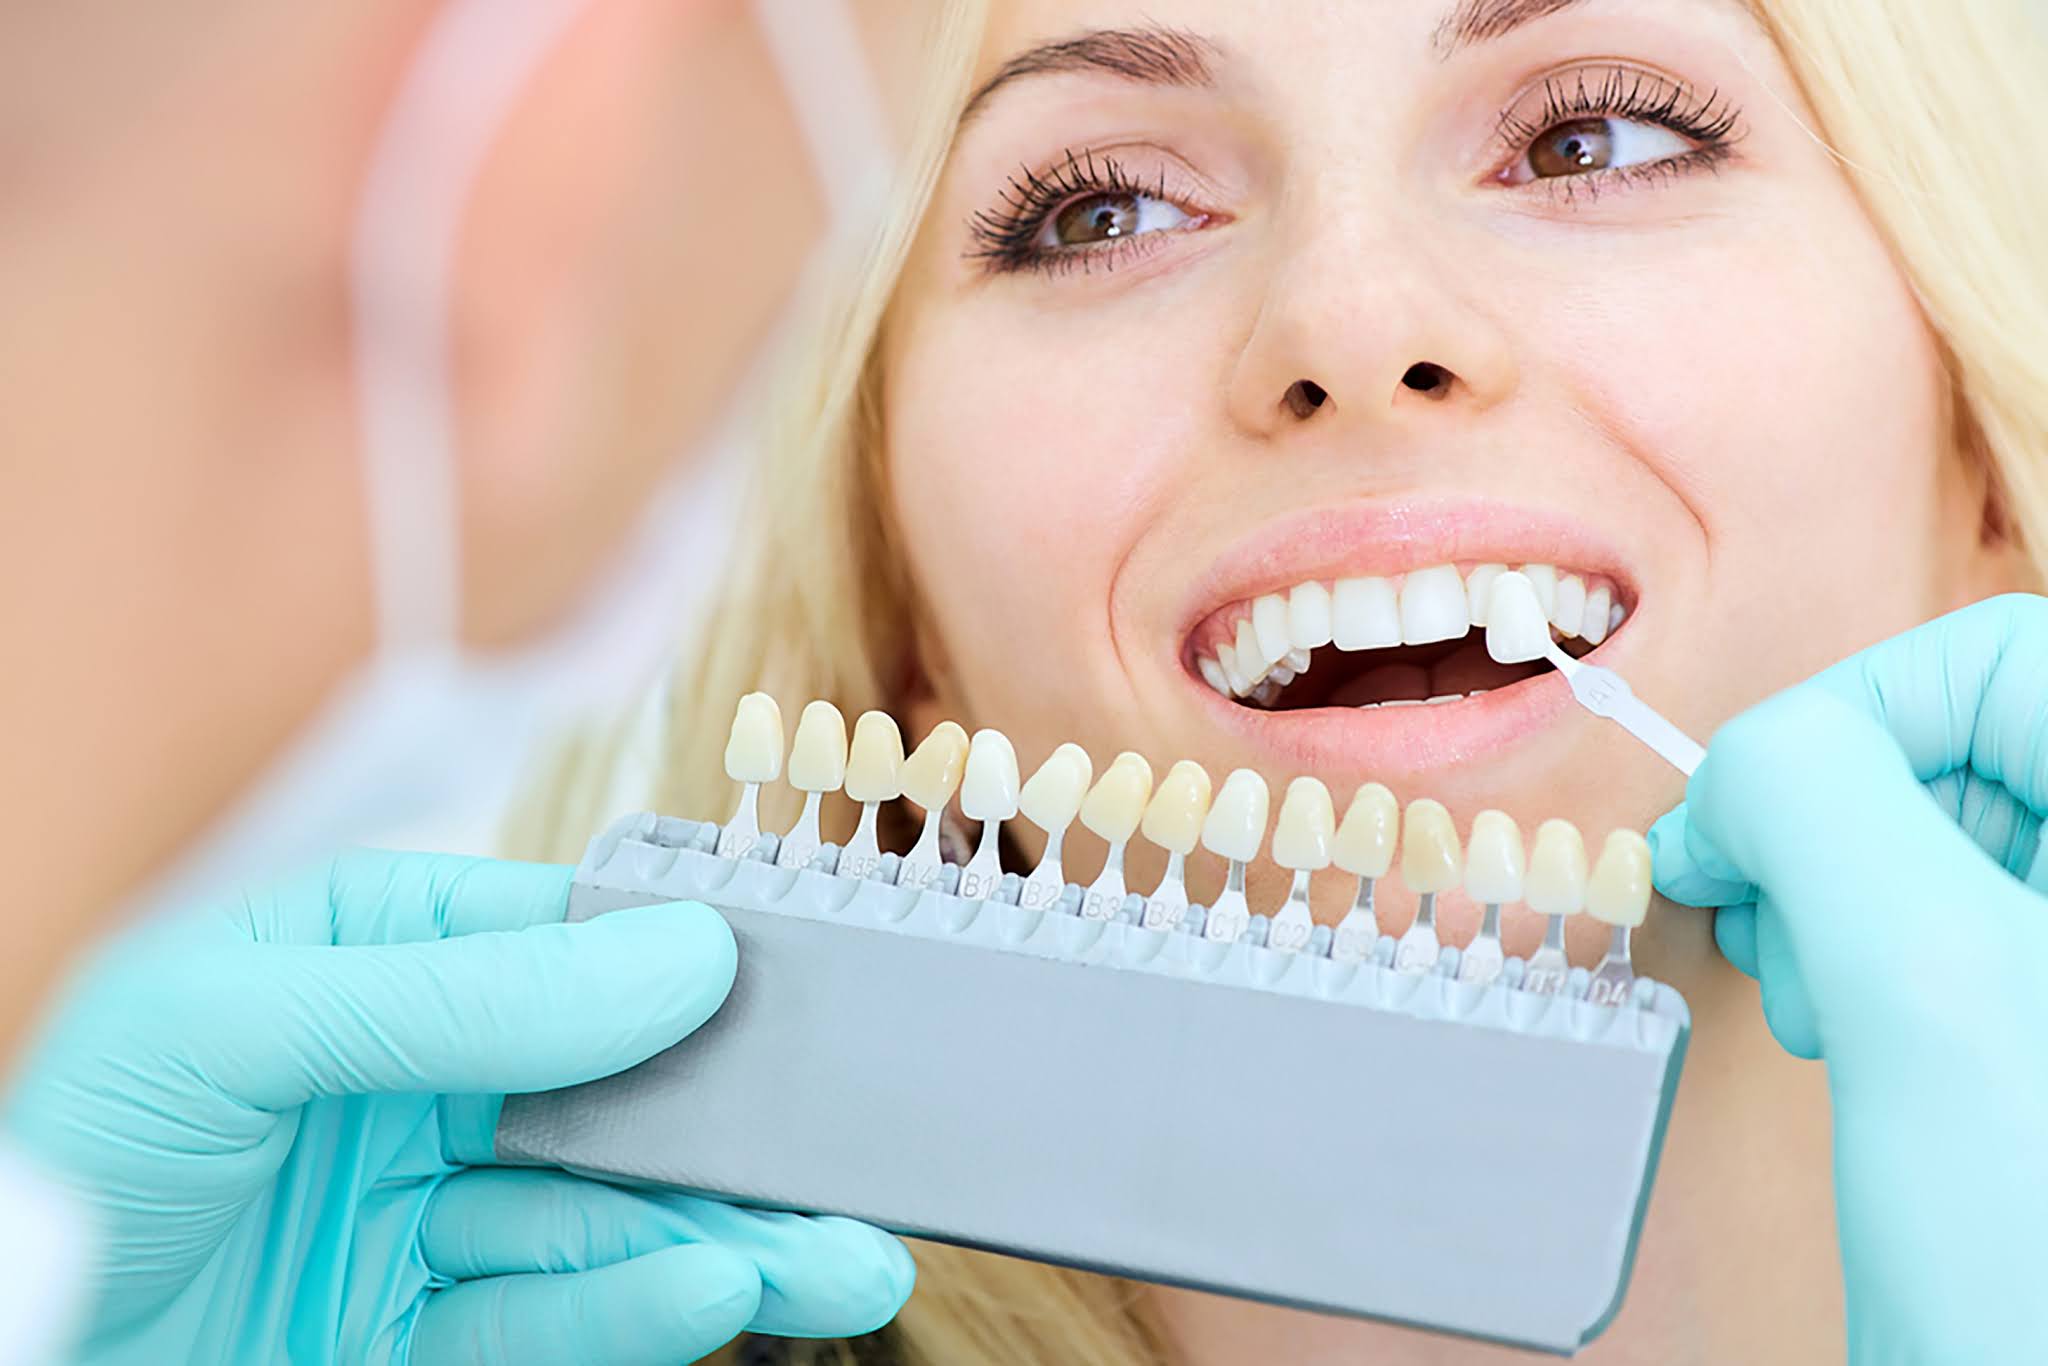 how can i whiten my teeth without damaging them